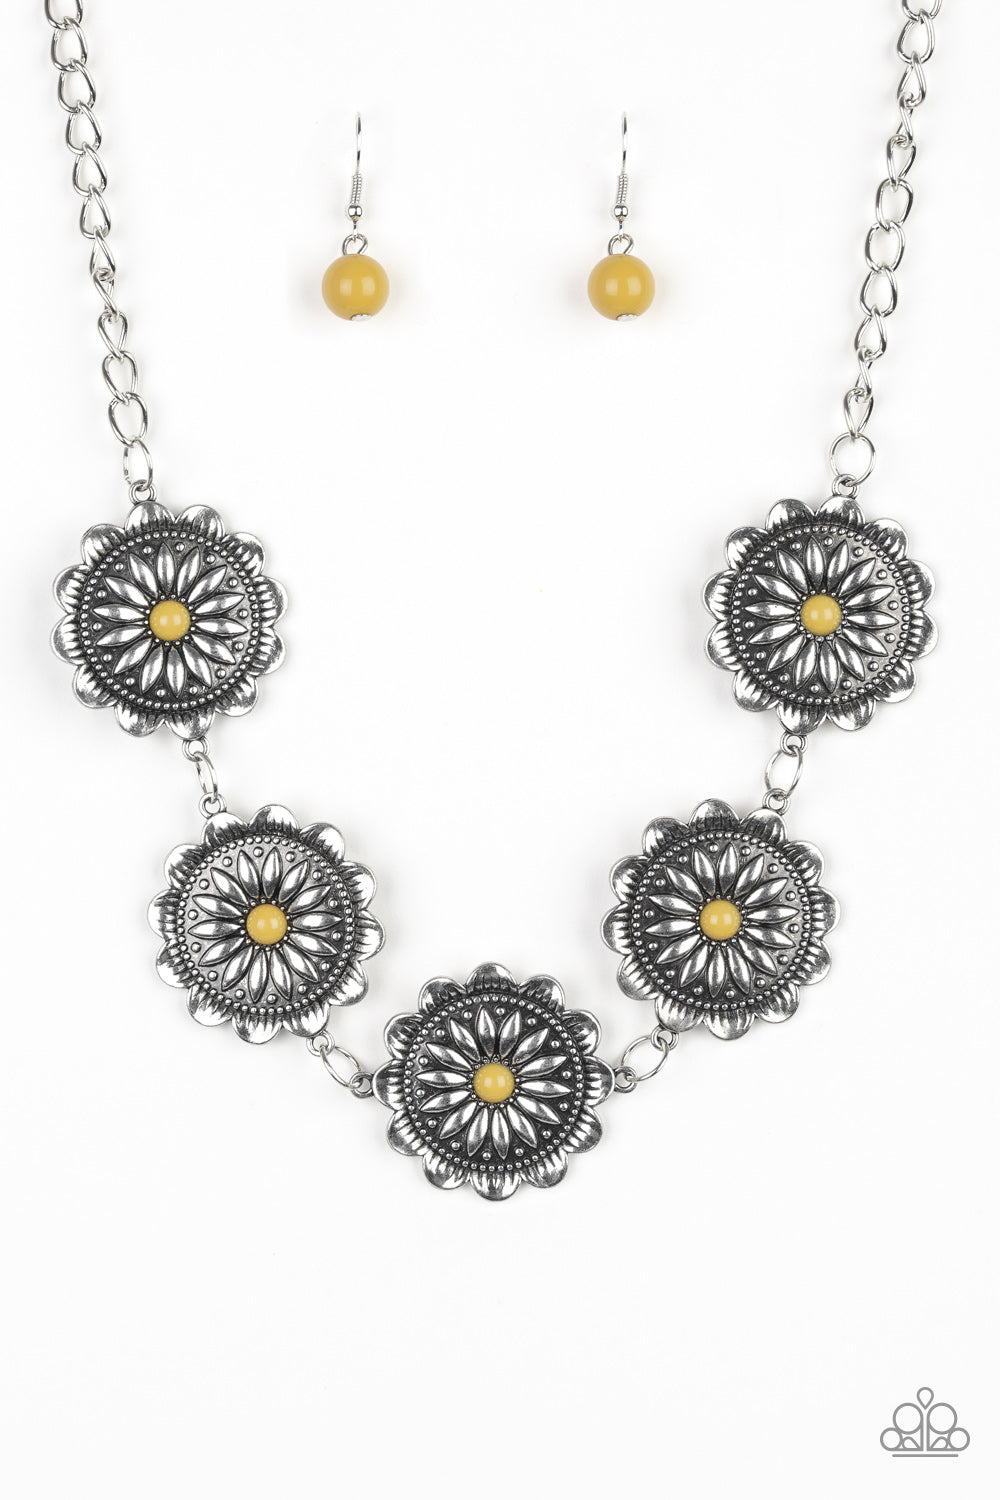 Me-dallions, Myself, and I - Yellow necklace 895